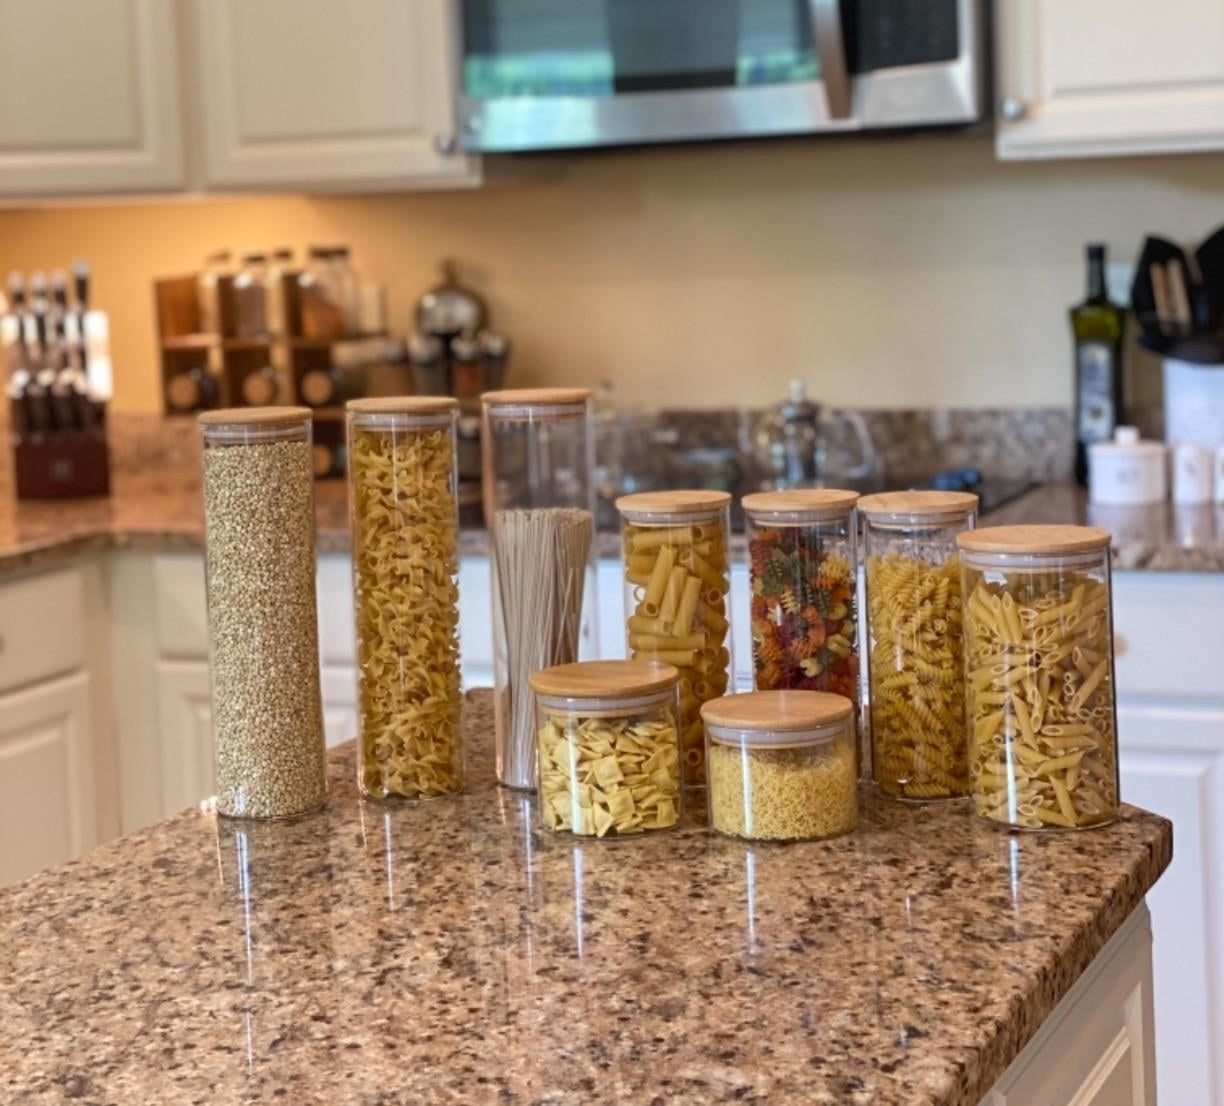 Reviewer photo of the containers on a counter with dried pasta and grains inside each one